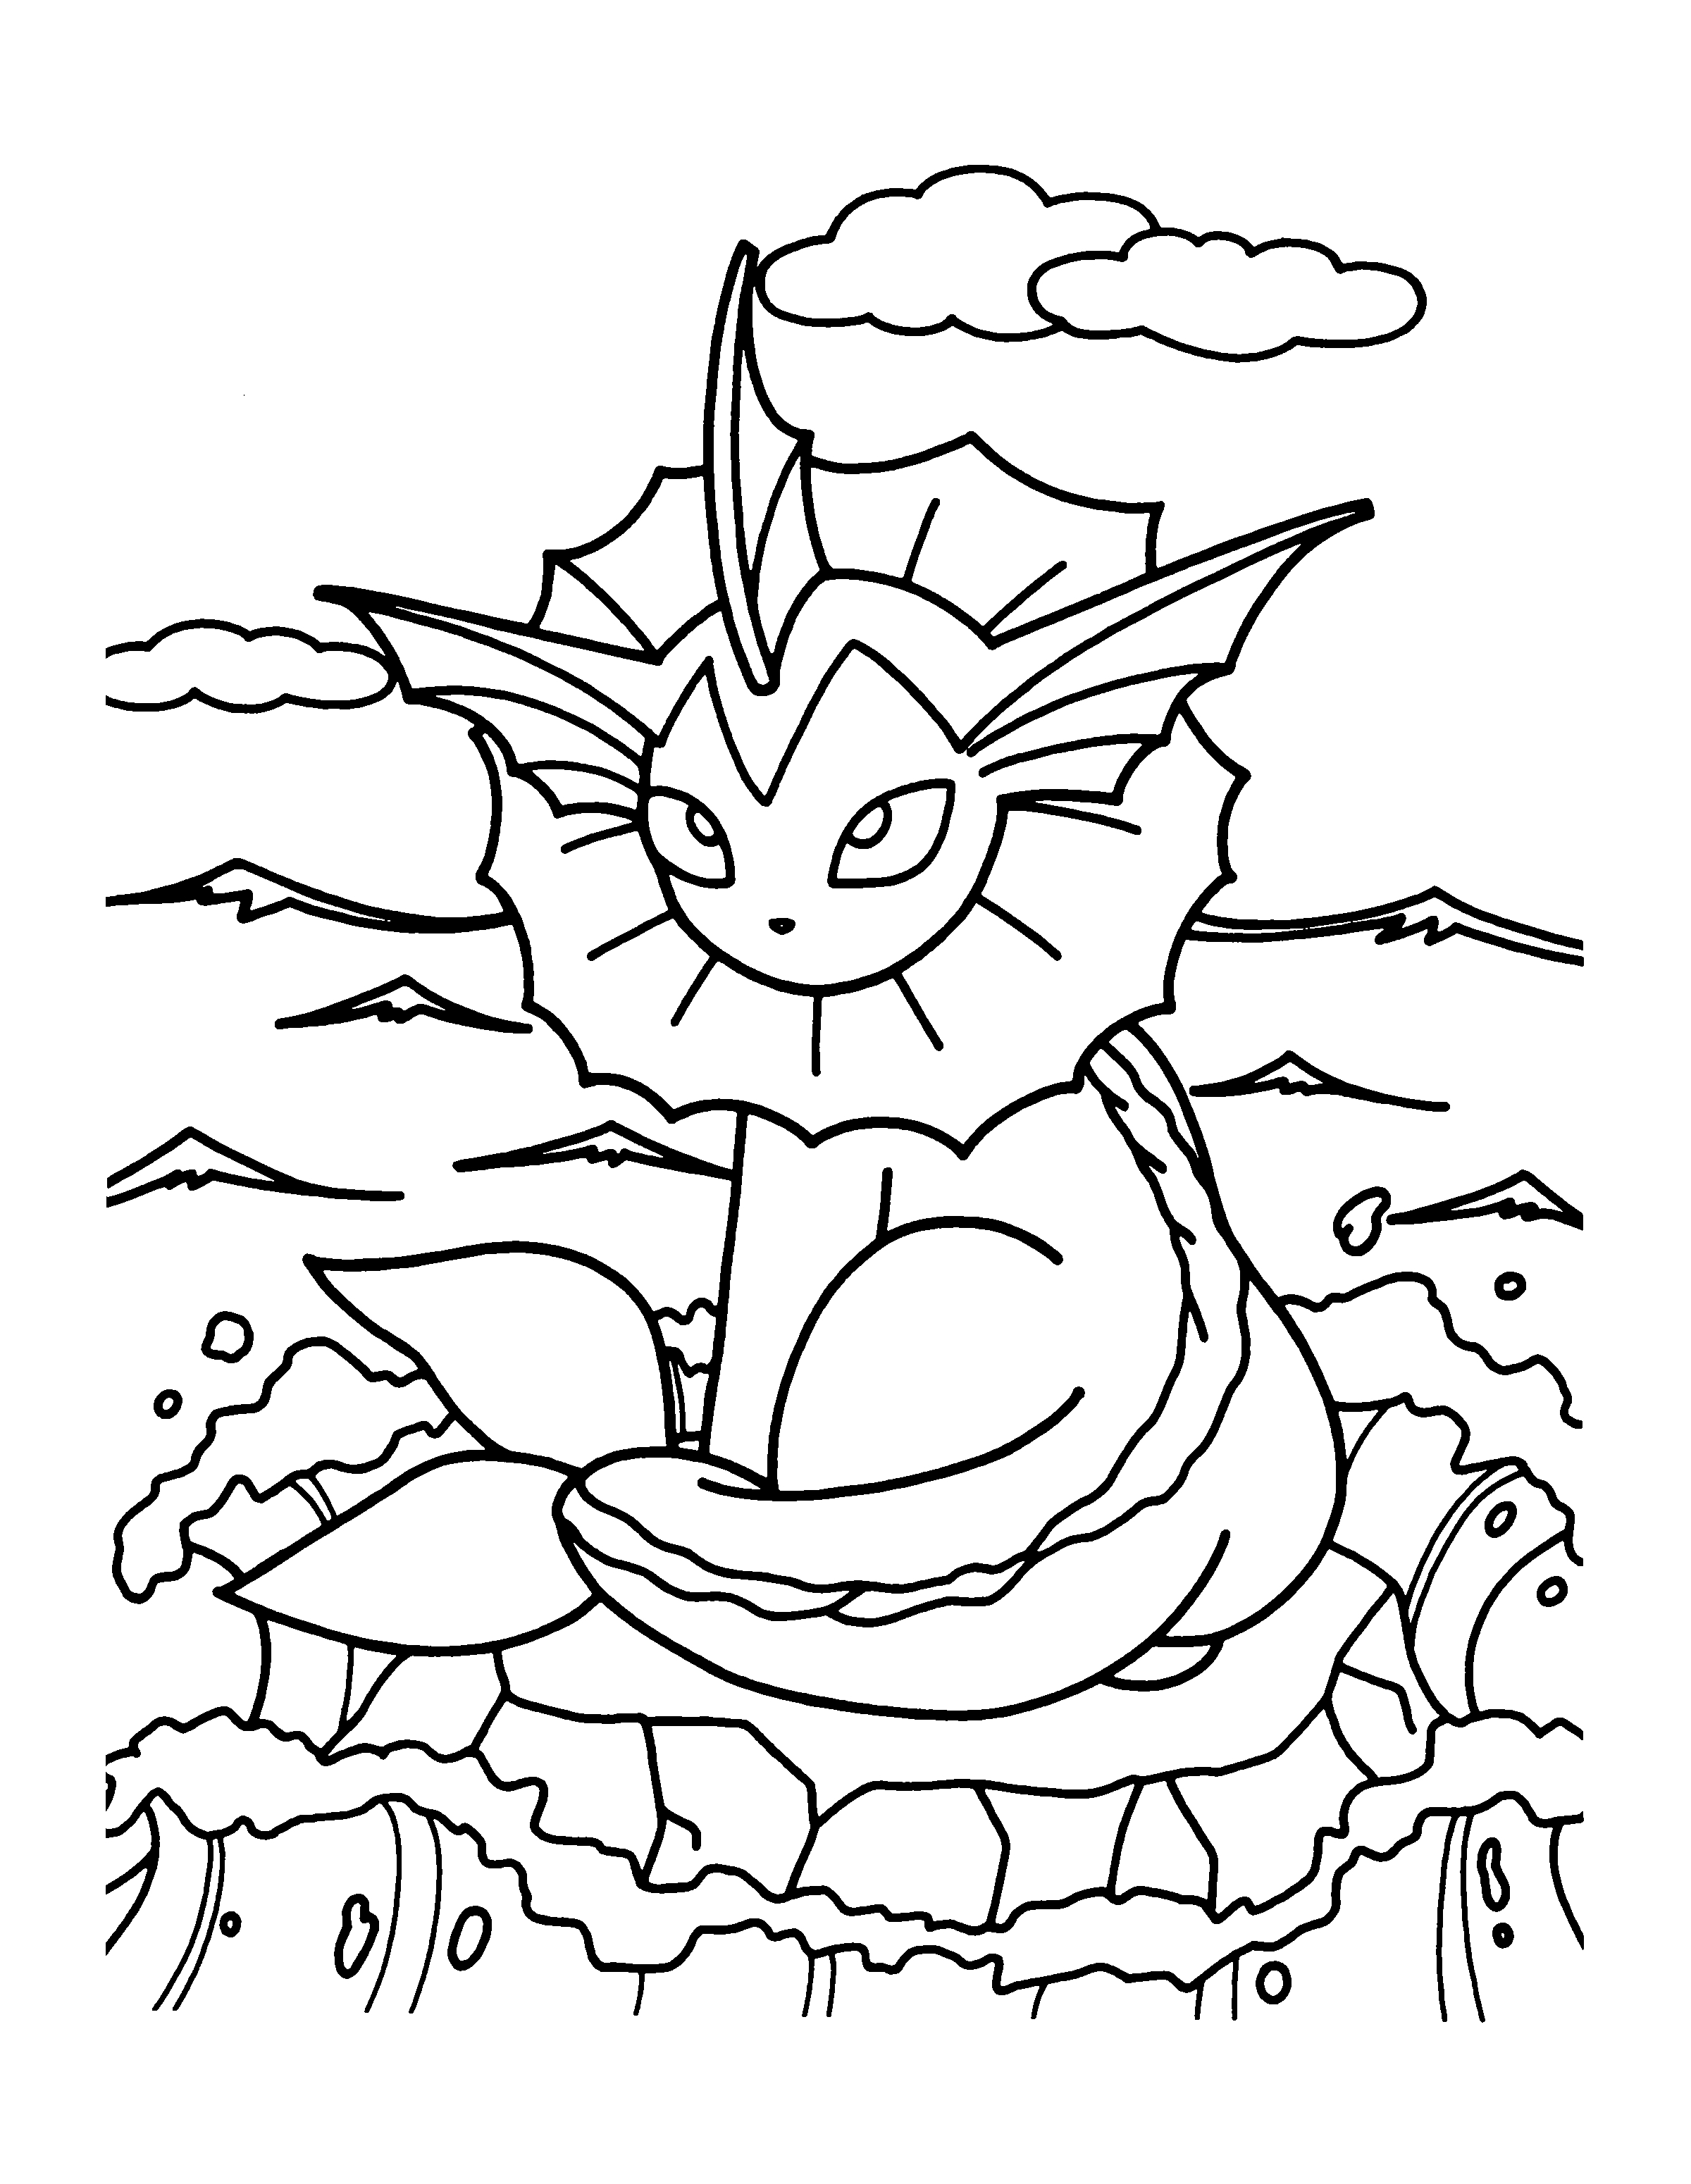 Charizard Coloring Pages Charizard Coloring Pages Free Free Coloring Book